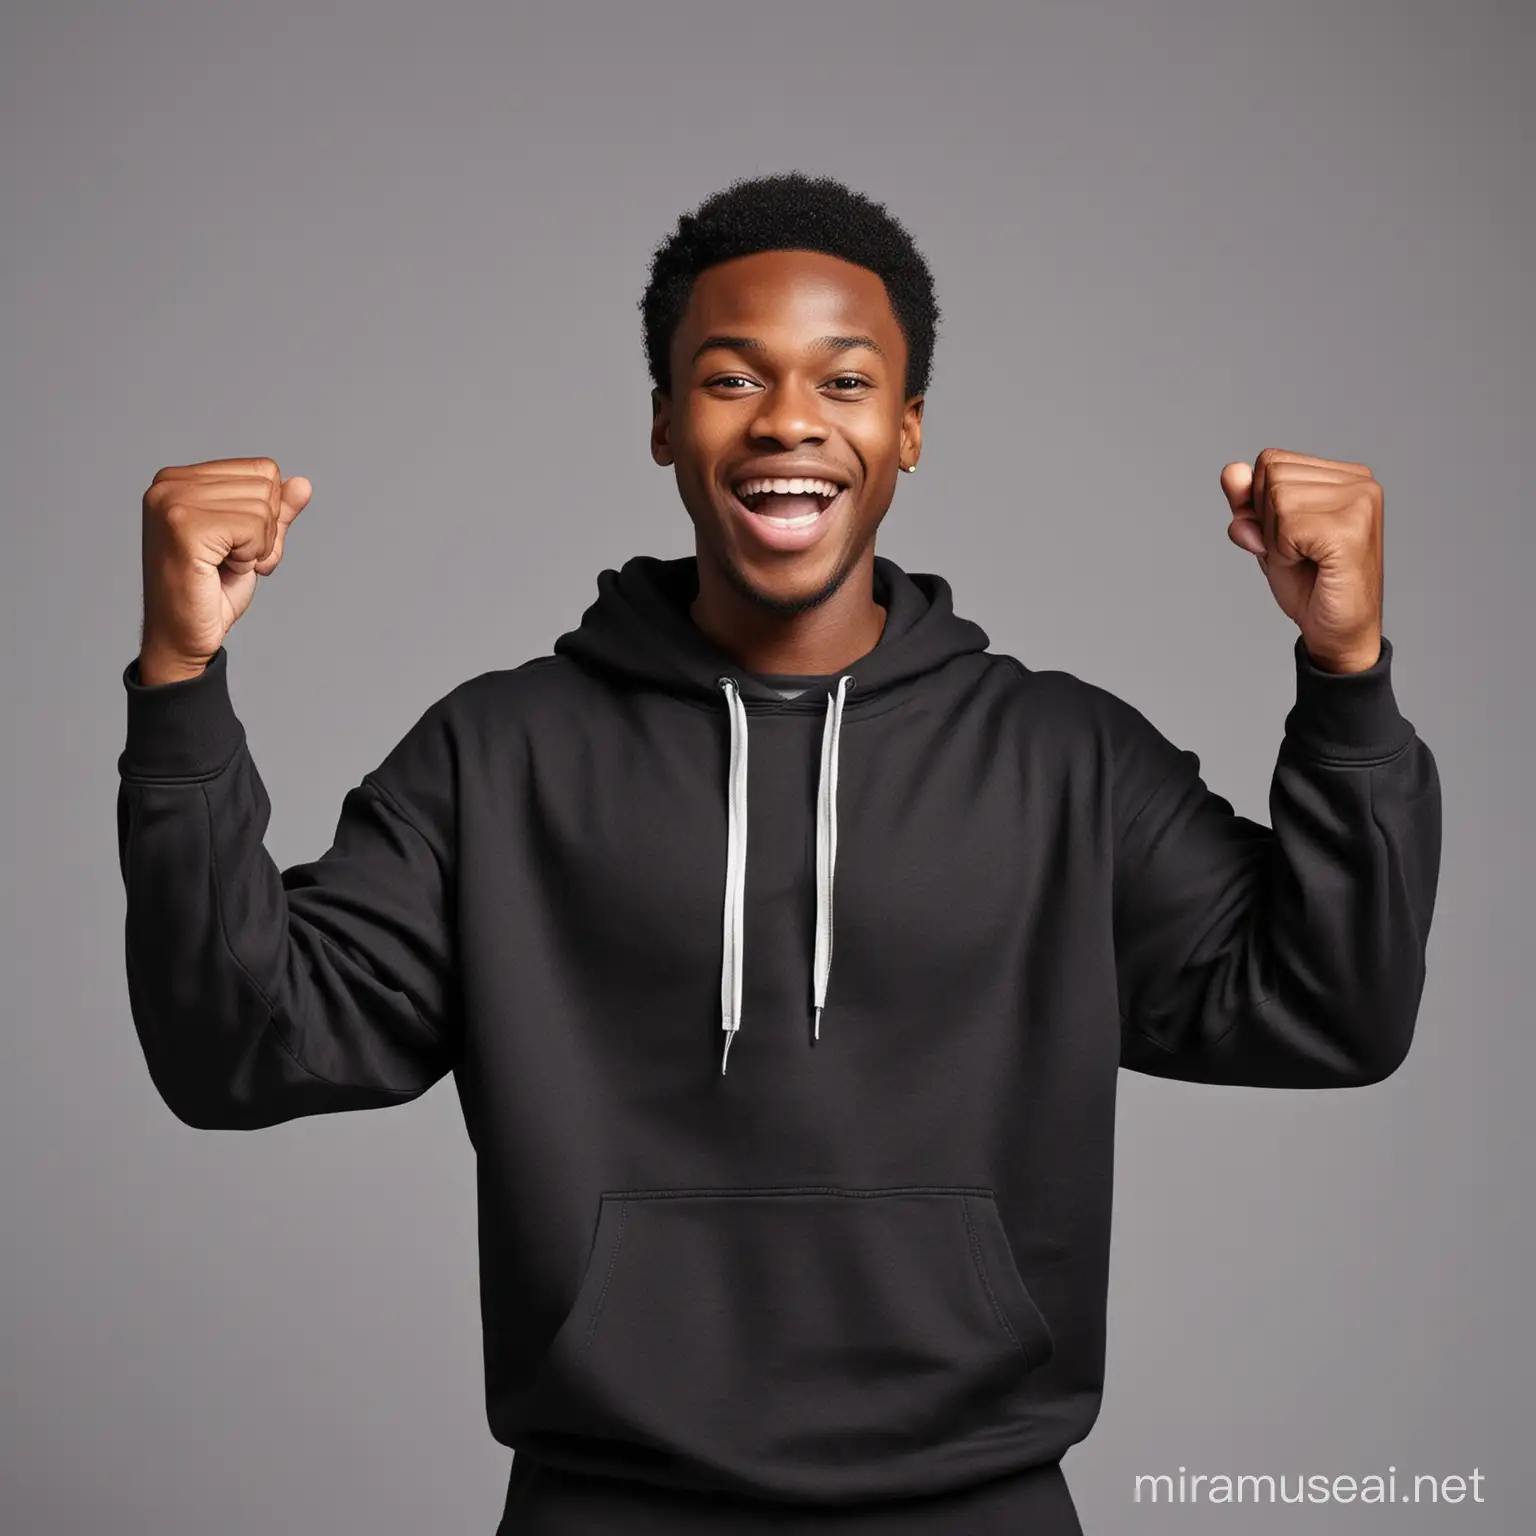 Excited African American Sports Fan Celebrating Victory in Black Sweatshirt